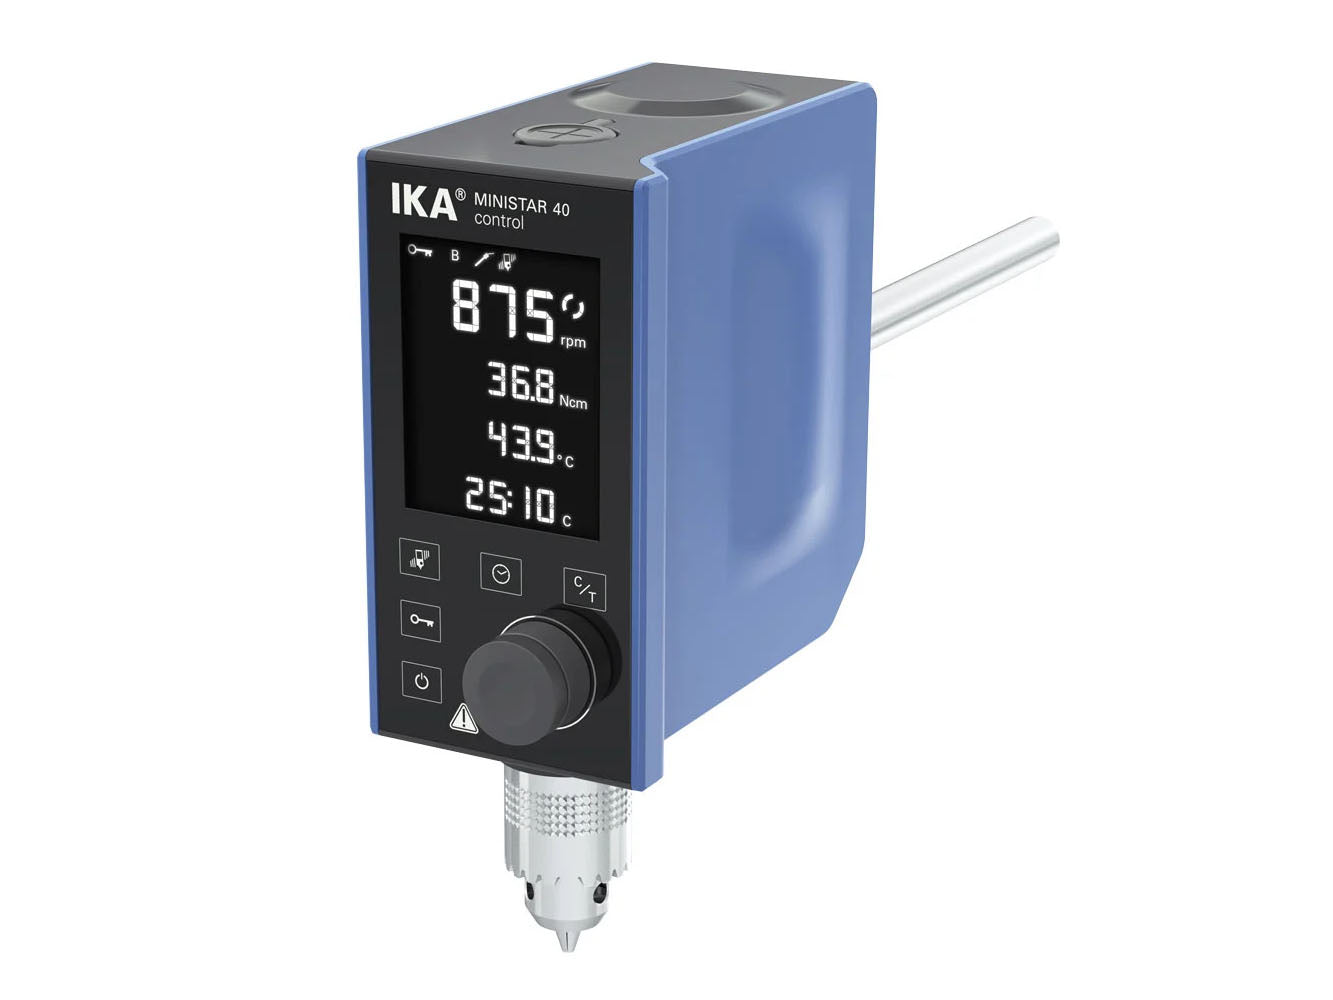 Overhead Electric Stirrer, LCD Display